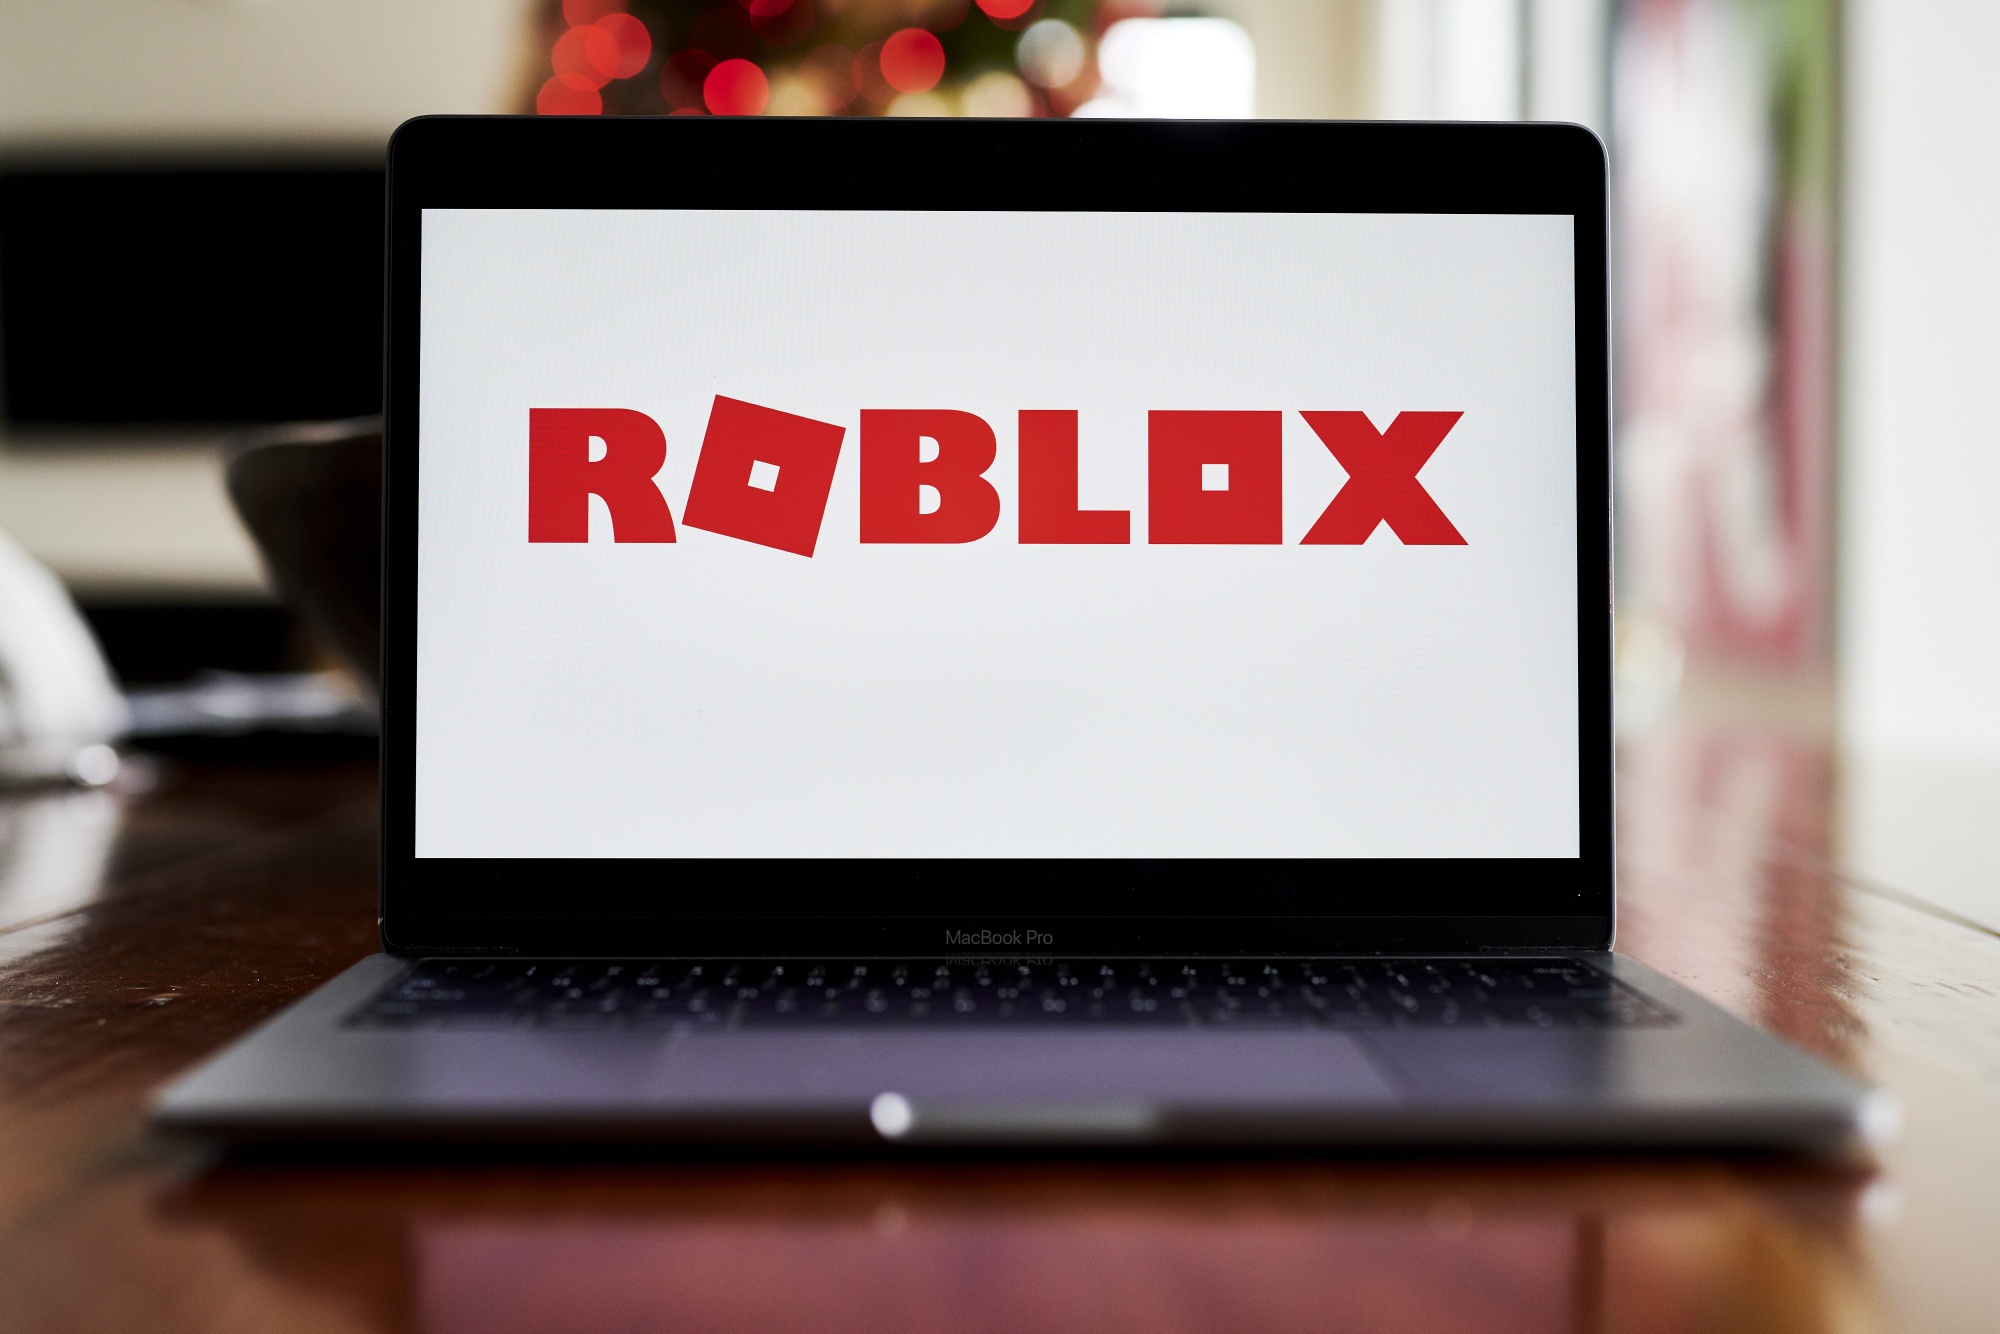 Roblox Corporation (RBLX): history, ownership, mission, how it works &  makes money